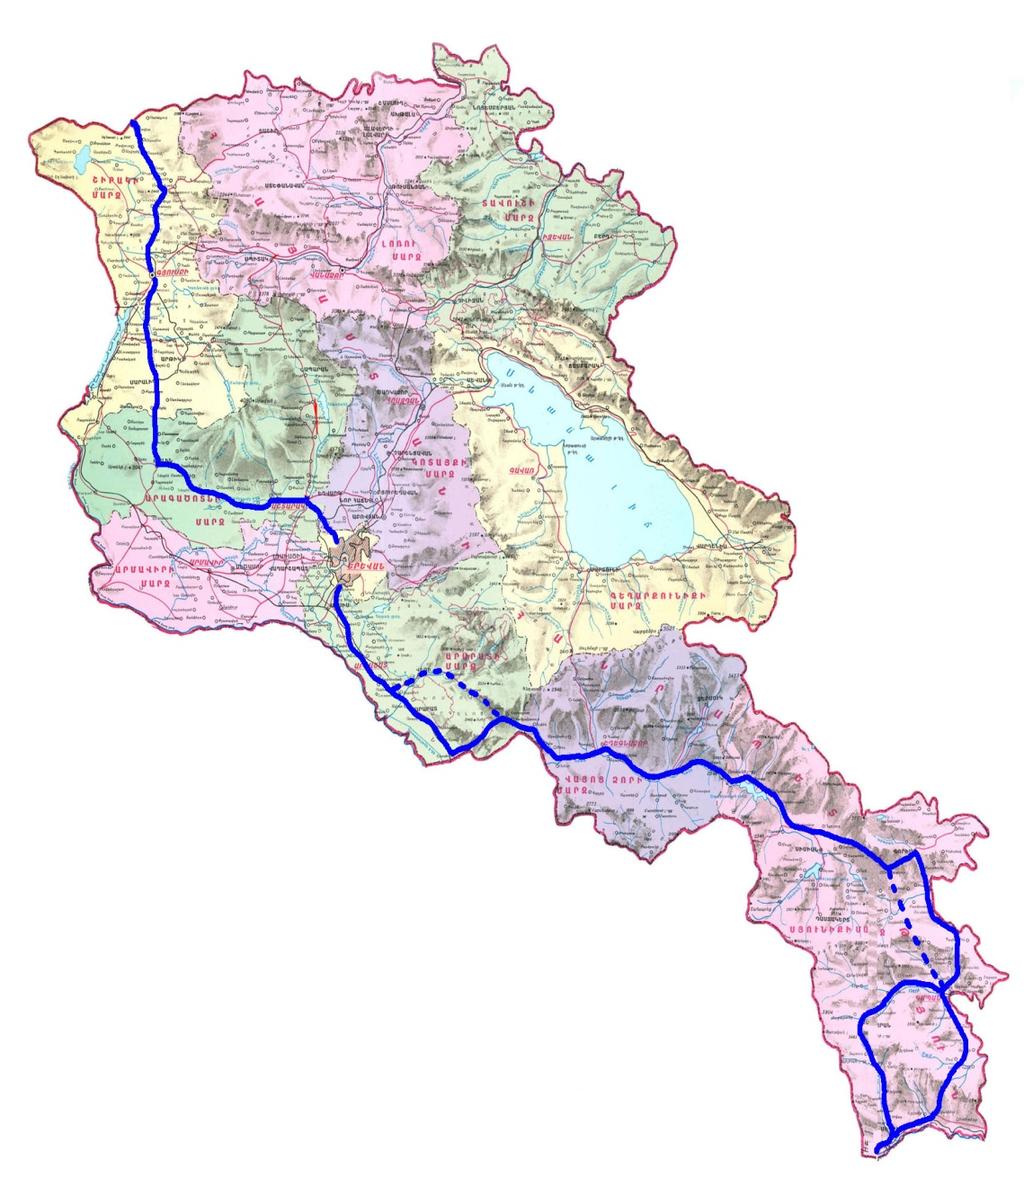 The further objectives of North South corridor New accesses towards Black Sea motorways Construction of Yerevan bypass This will facilitate the movement of lorries through bypassing of Yerevan, thus